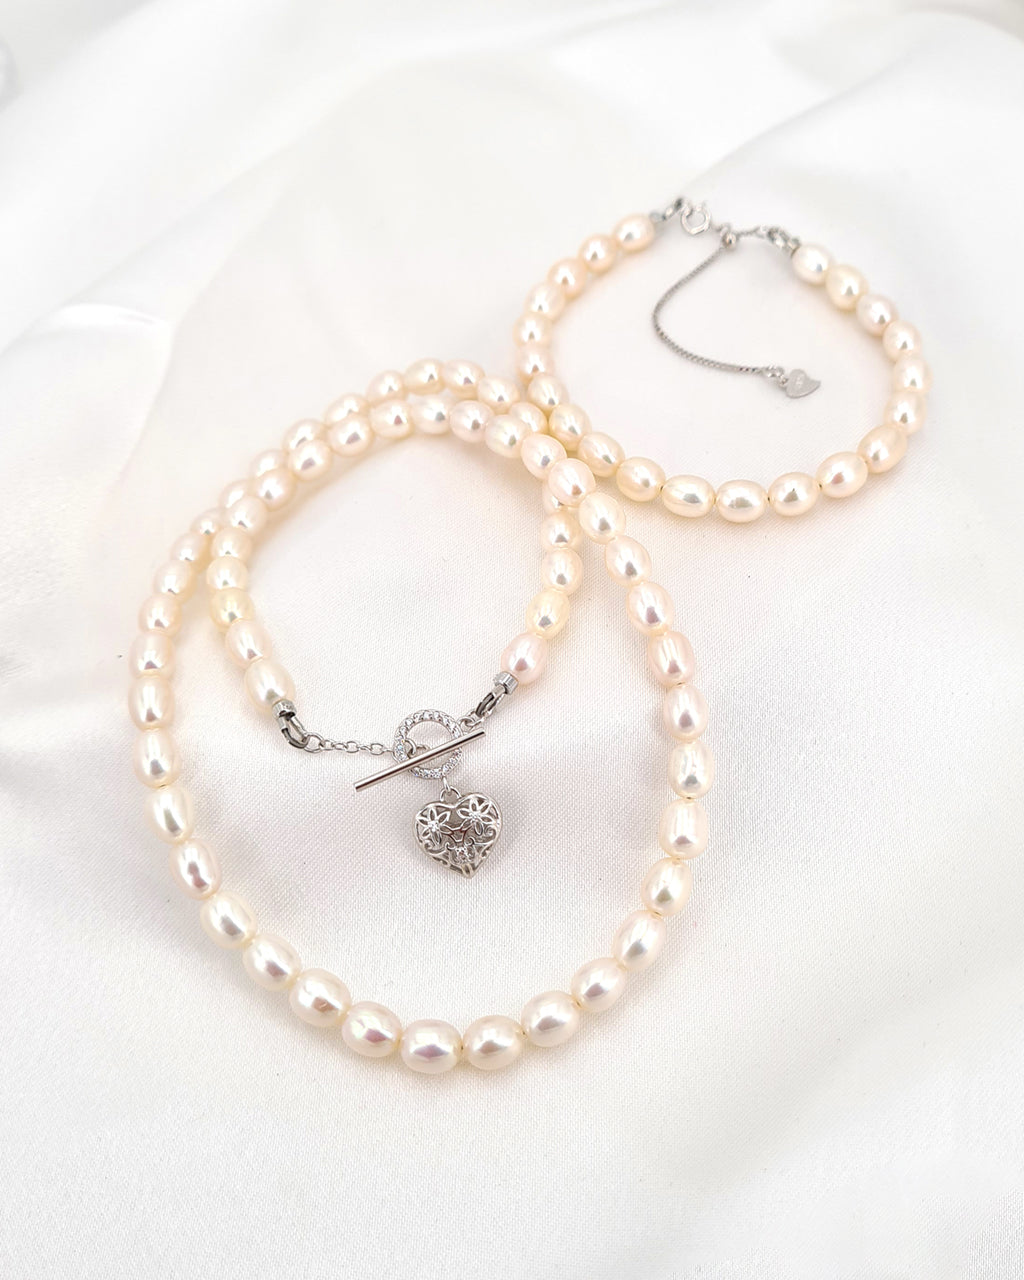 White Freshwater Pearl Necklace with Heart Toggle Clasp | Pearl Necklace and Bracelet Jewelry Set